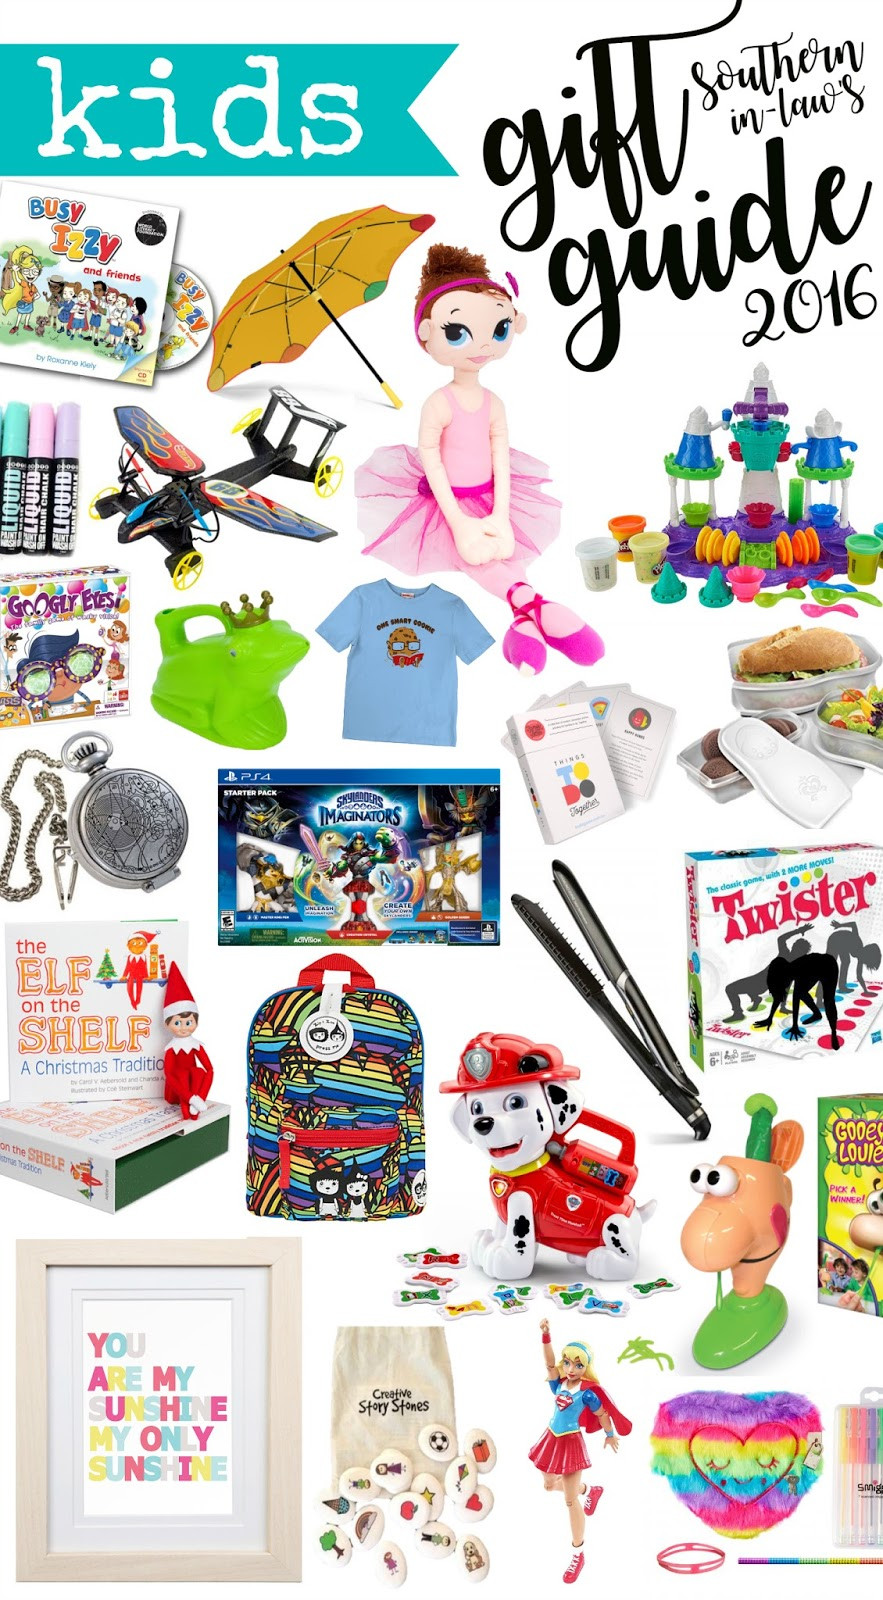 Best Christmas Gift For Kids
 Southern In Law 2016 Kids Christmas Gift Guide